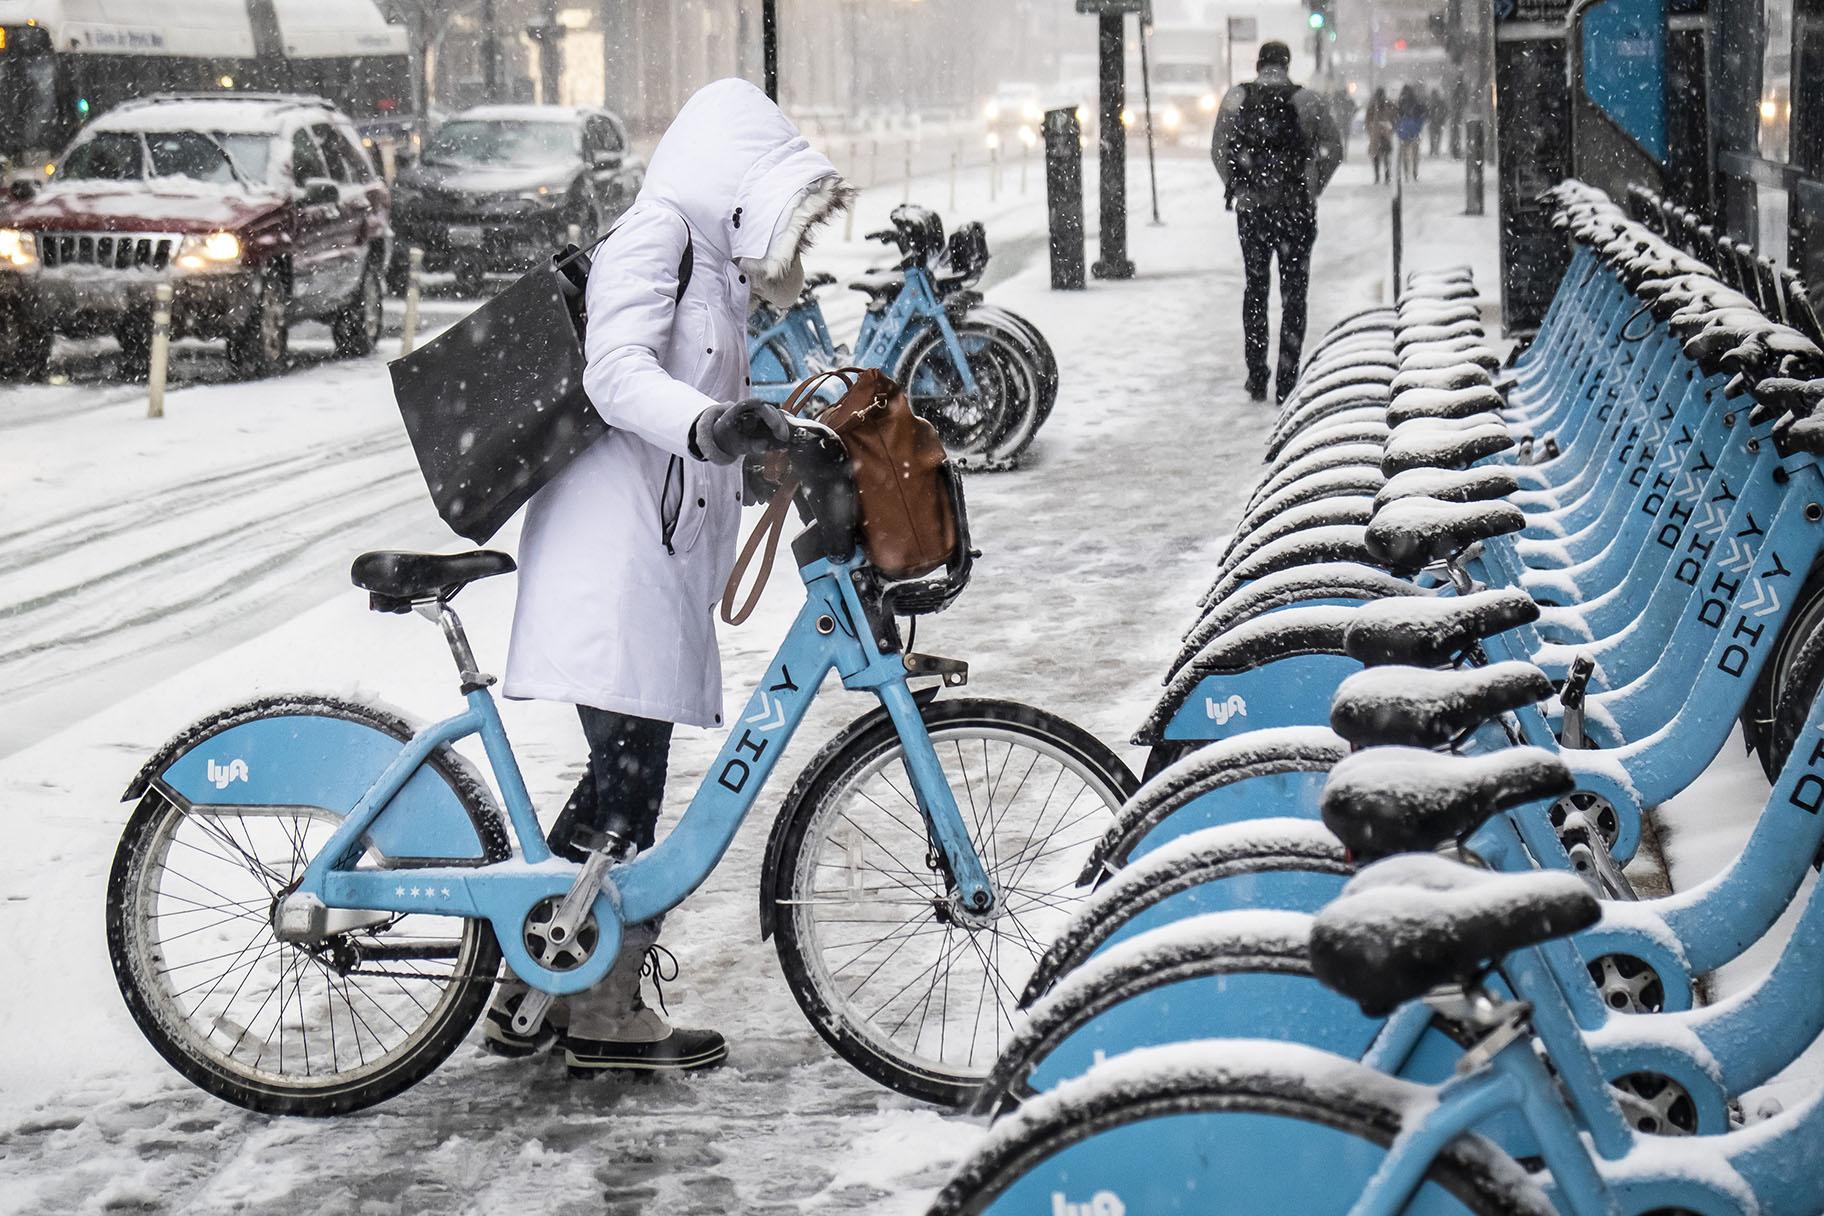 A woman clears off a Divvy bike as a winter weather advisory is issued for the Chicago area on Monday, Nov. 11, 2019, in Chicago. (Rich Hein / Chicago Sun-Times via AP)